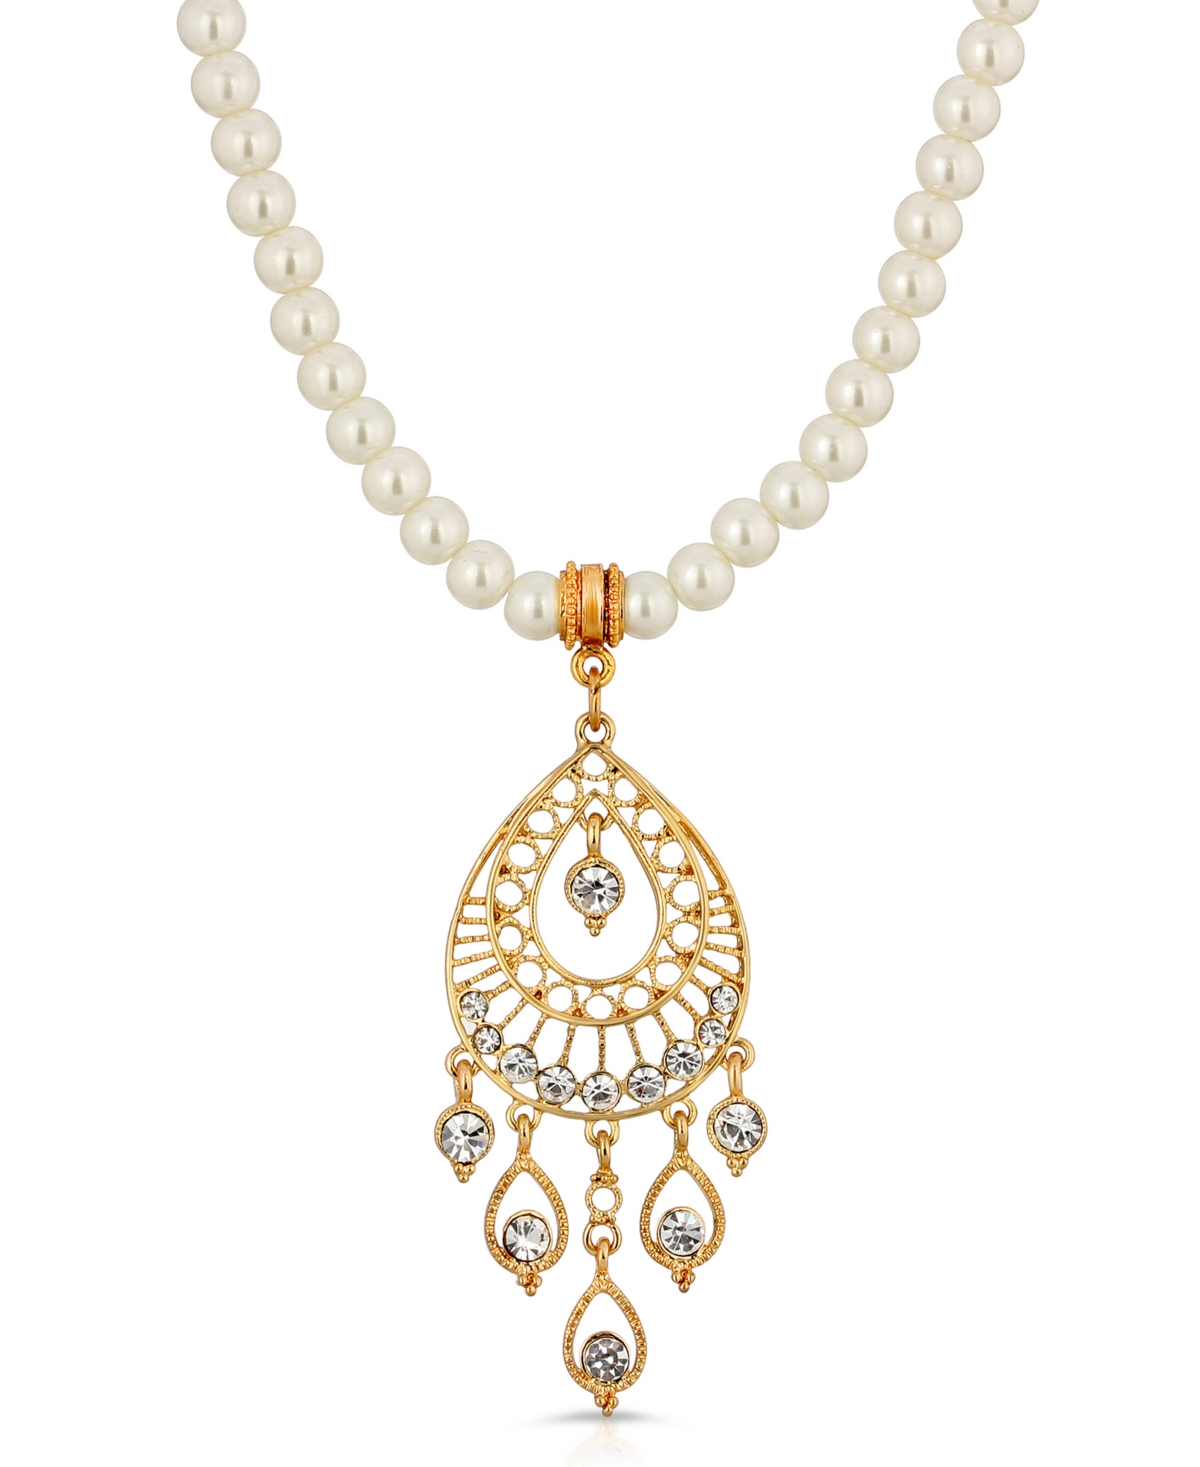 2028 Gold Tone Crystal Filigree Drop Imitation Pearl Necklace In White